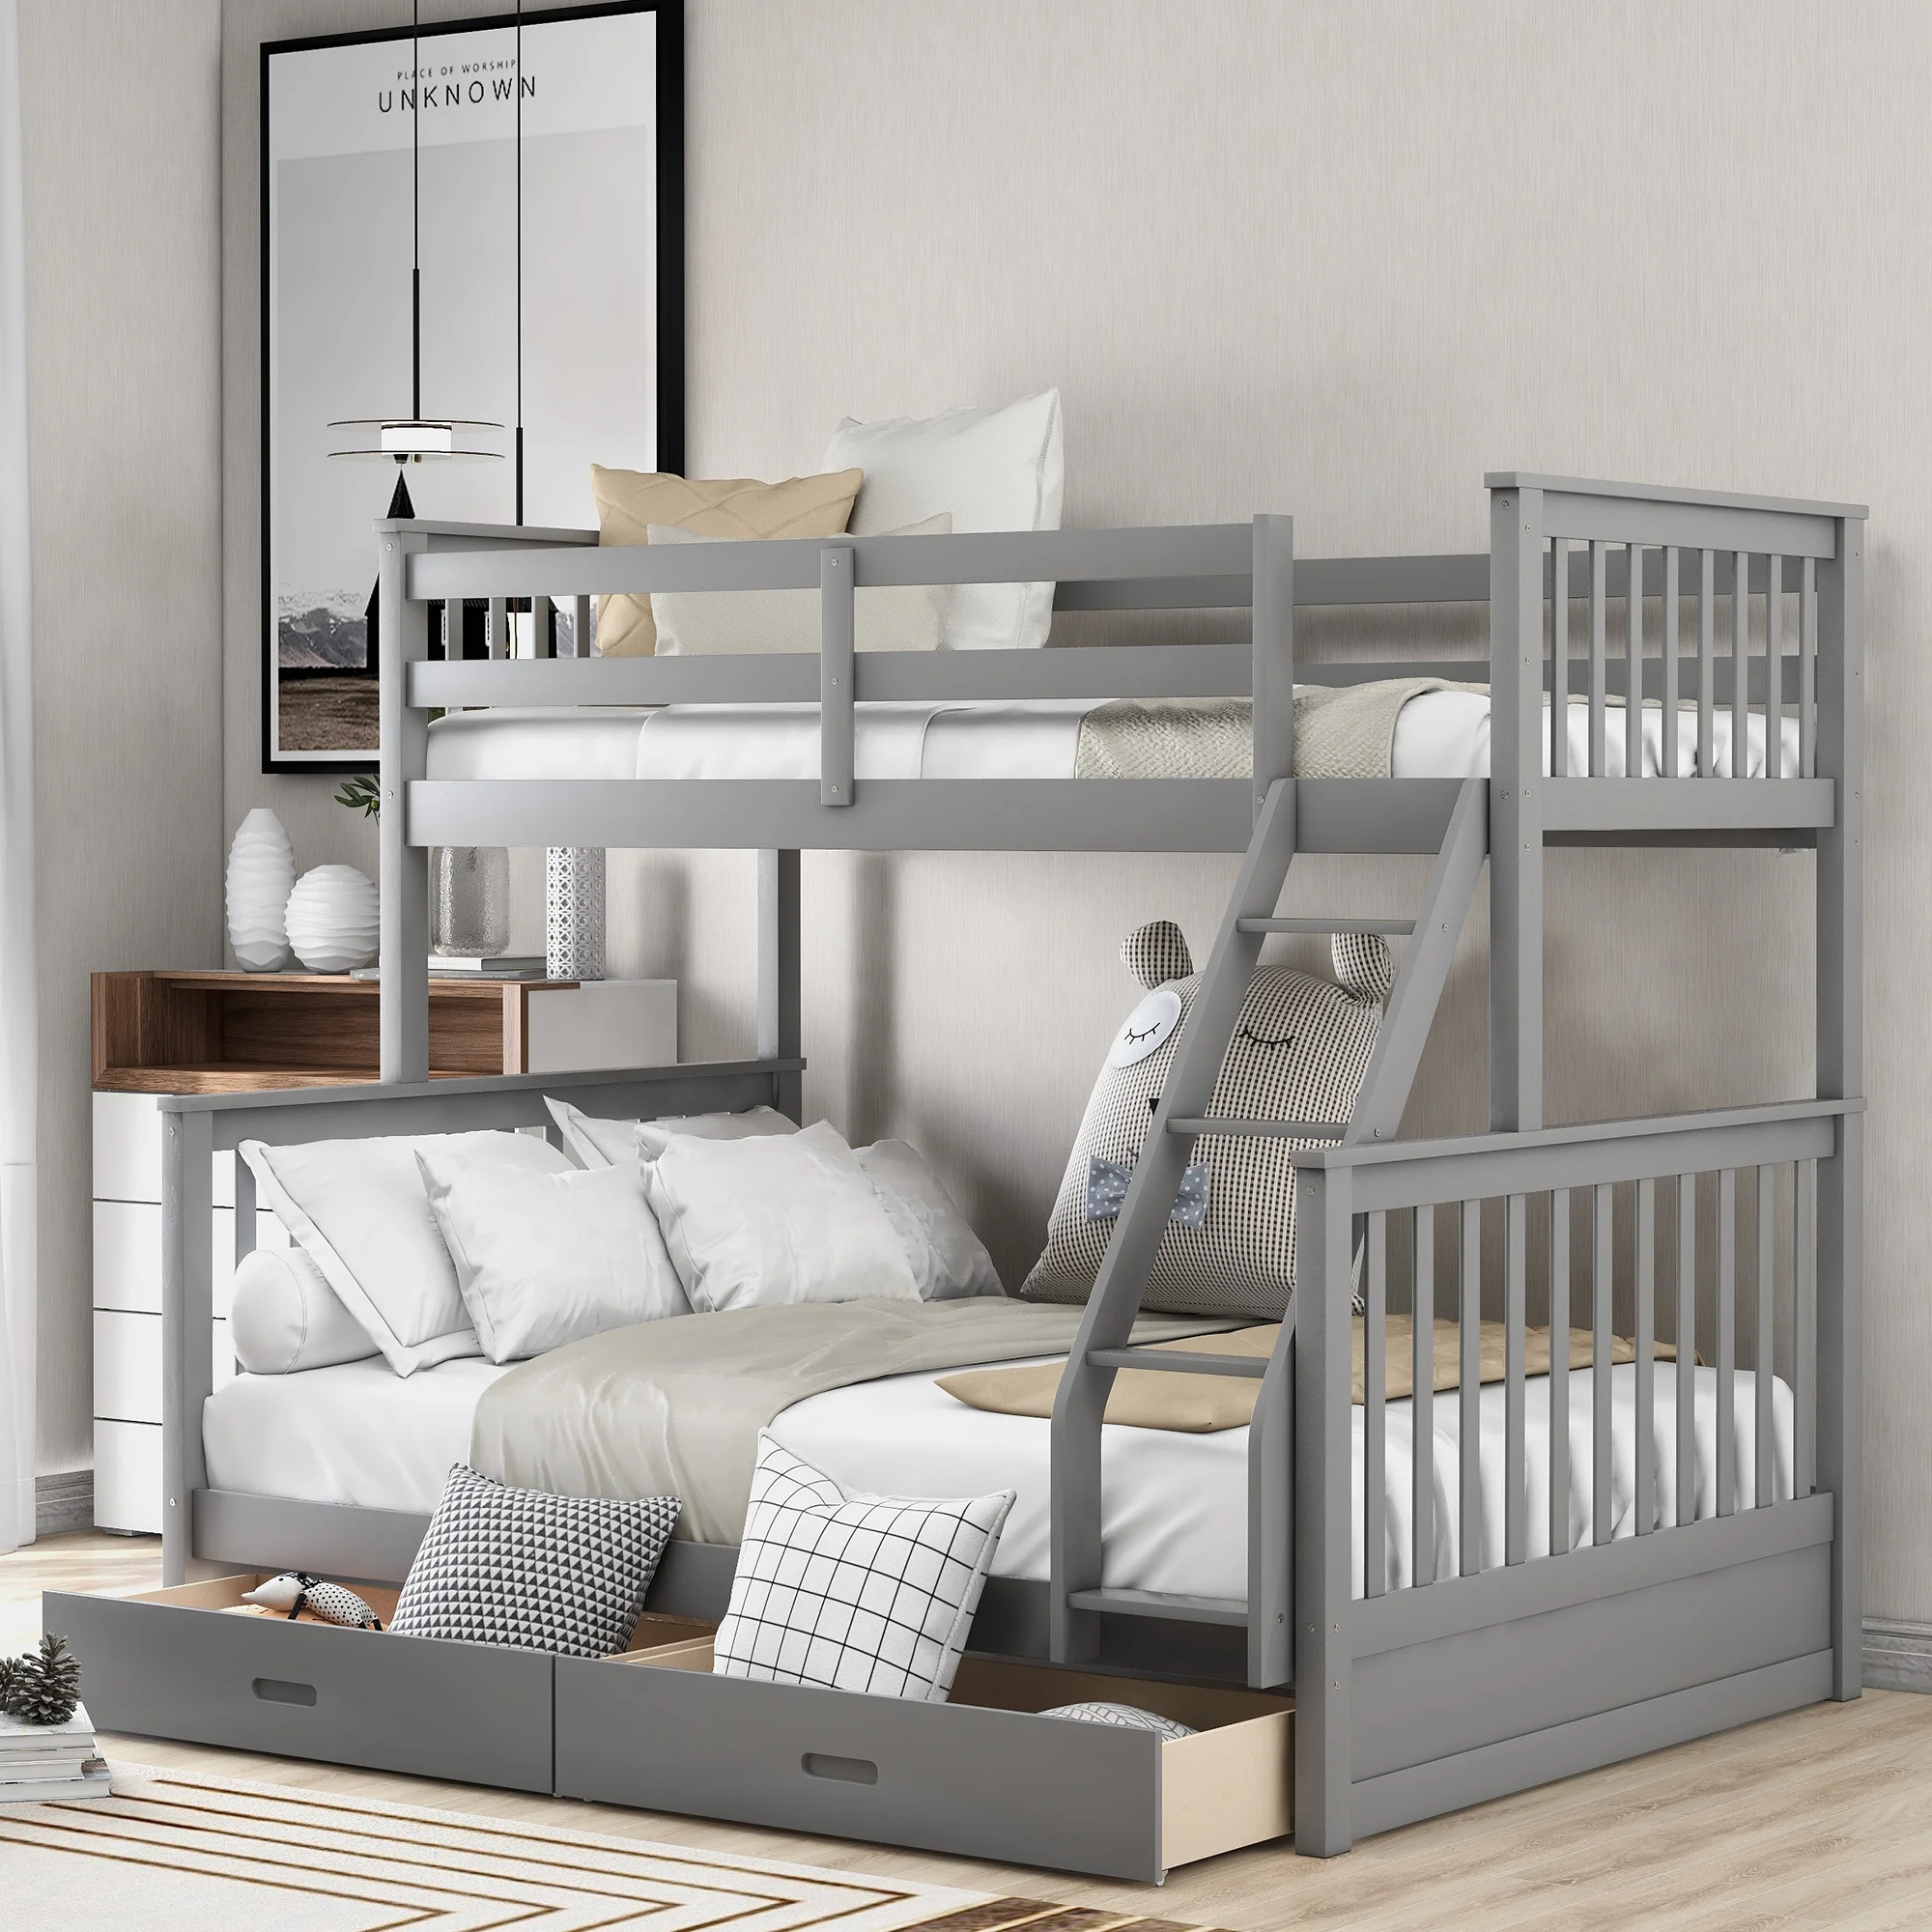 

Home Modern Minimalist Wooden Bedroom Furniture Beds Frames Bases Twin-over-full Bunk Bed With Ladders Two Storage Drawers Gray